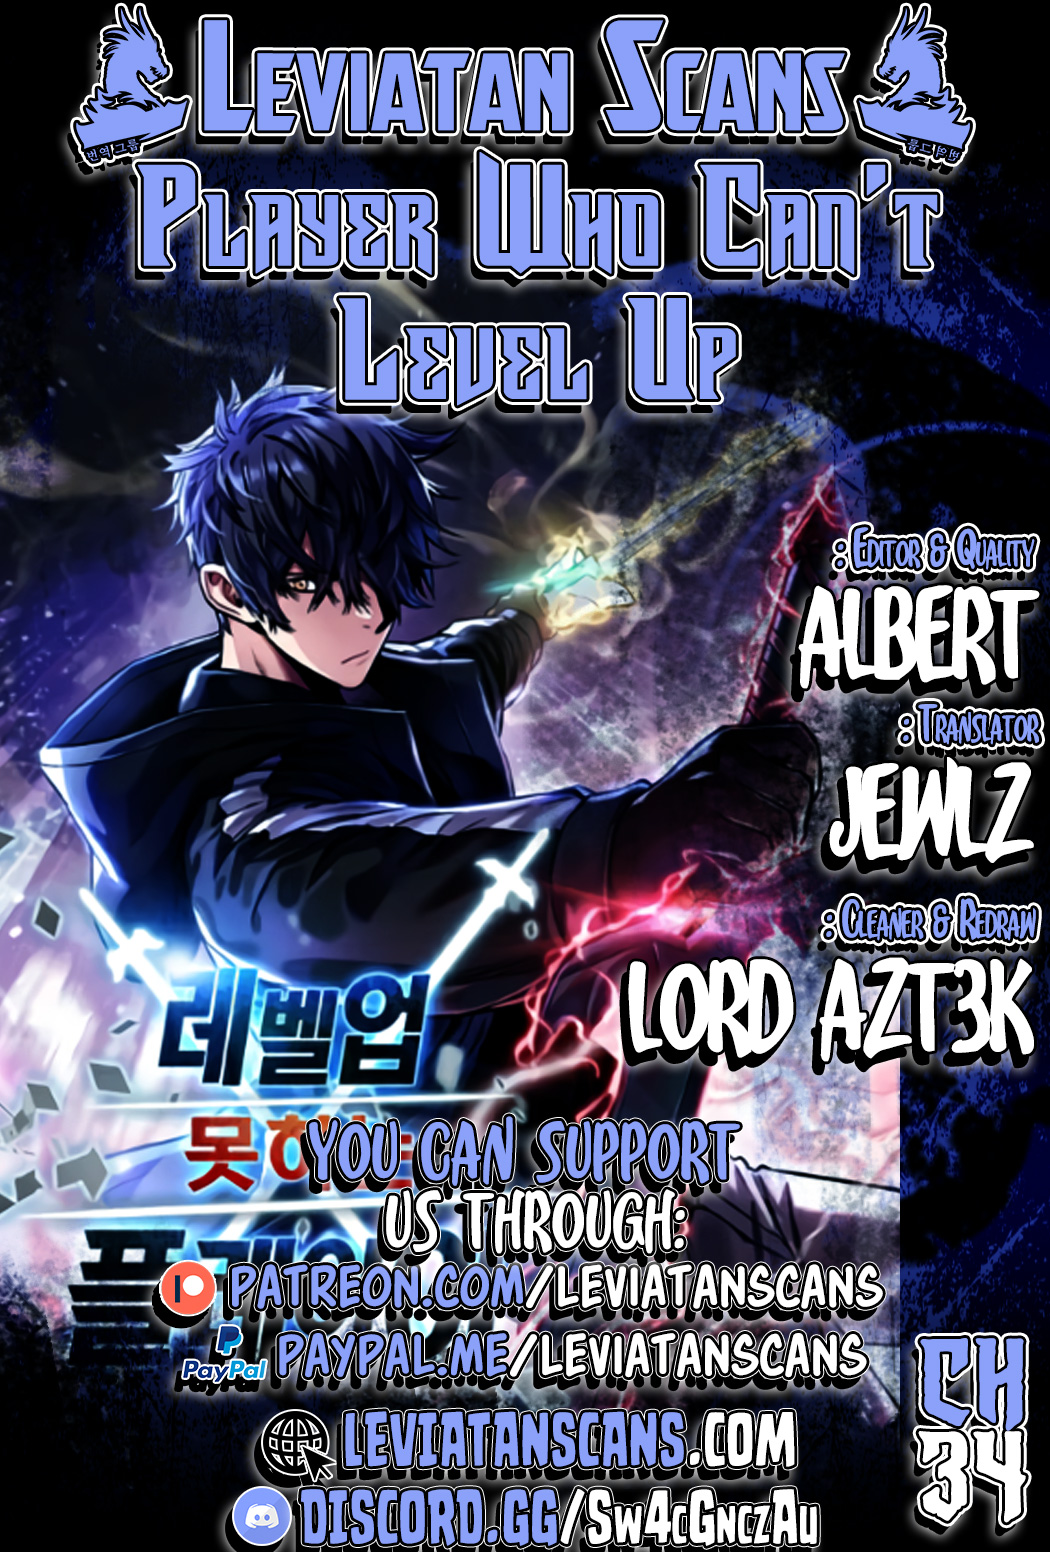 The Player That Can't Level Up - Chapter 5973 - Image 1